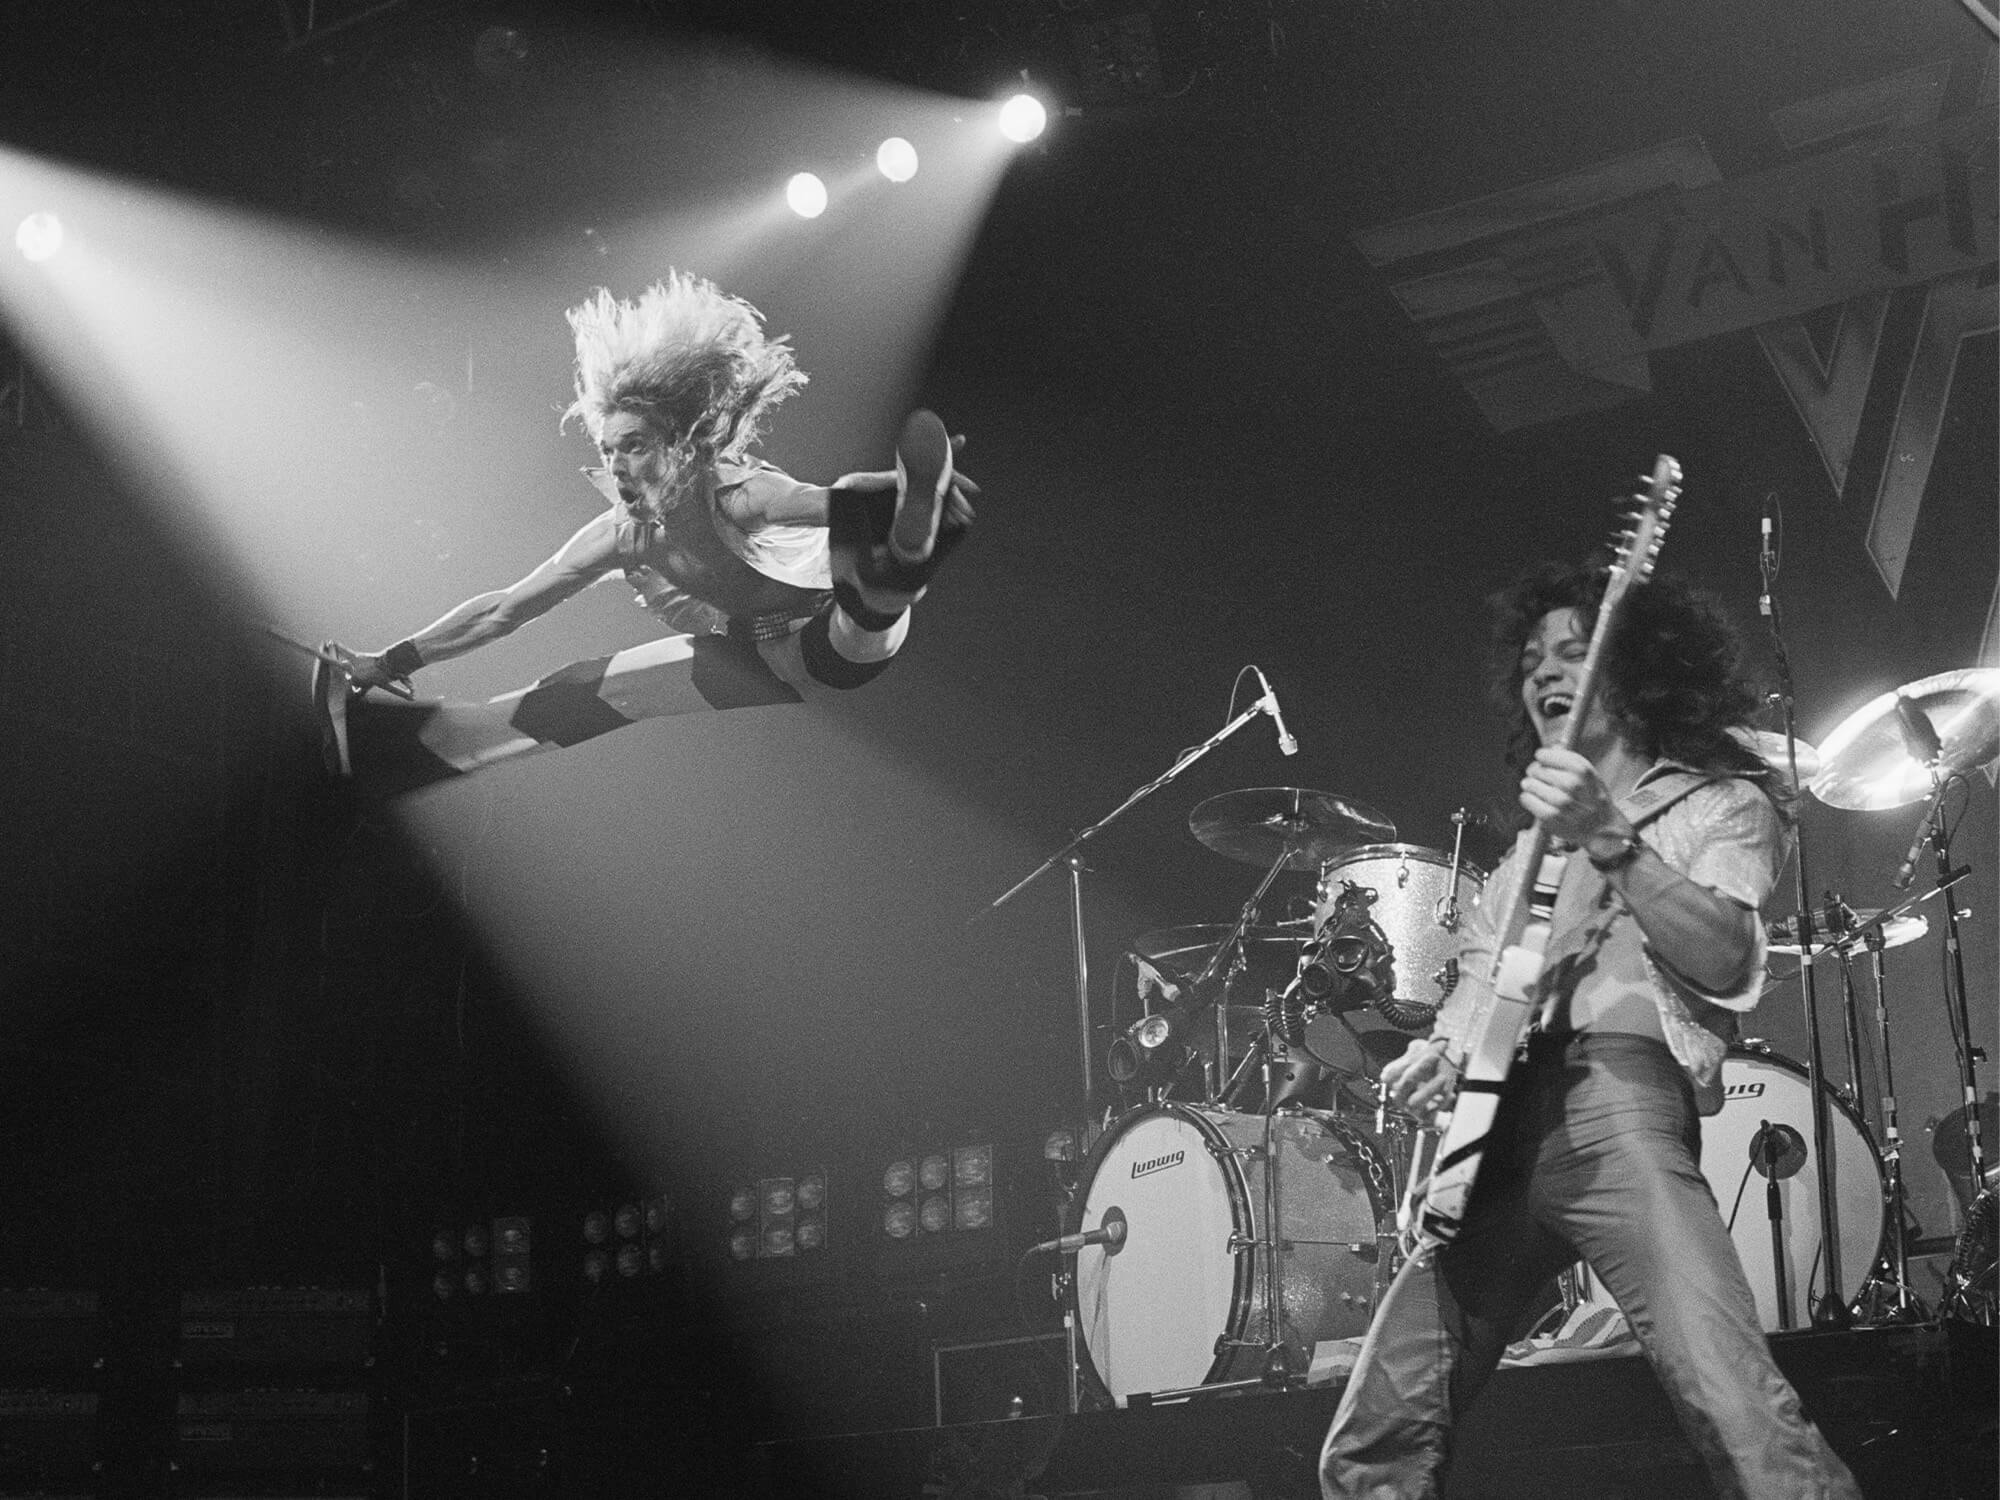 Black and white photo of Van Halen on stage in 1978. David lee Roth is jumping high in the air in the splits, whilst Eddie Van Halen is playing guitar and smiling.